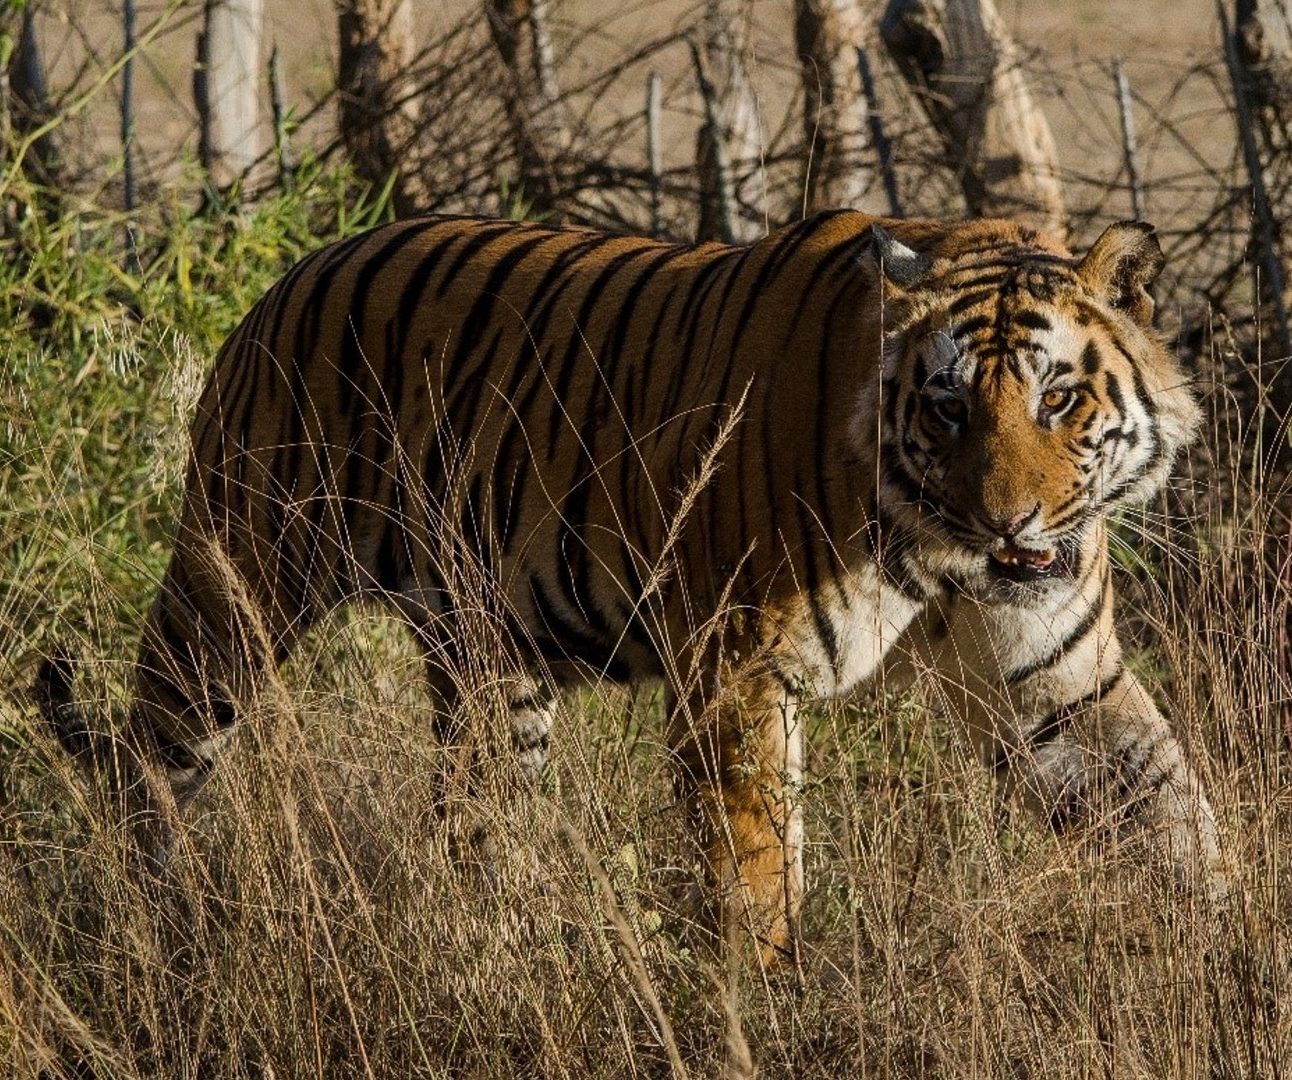 An adult tiger walking through a forested area